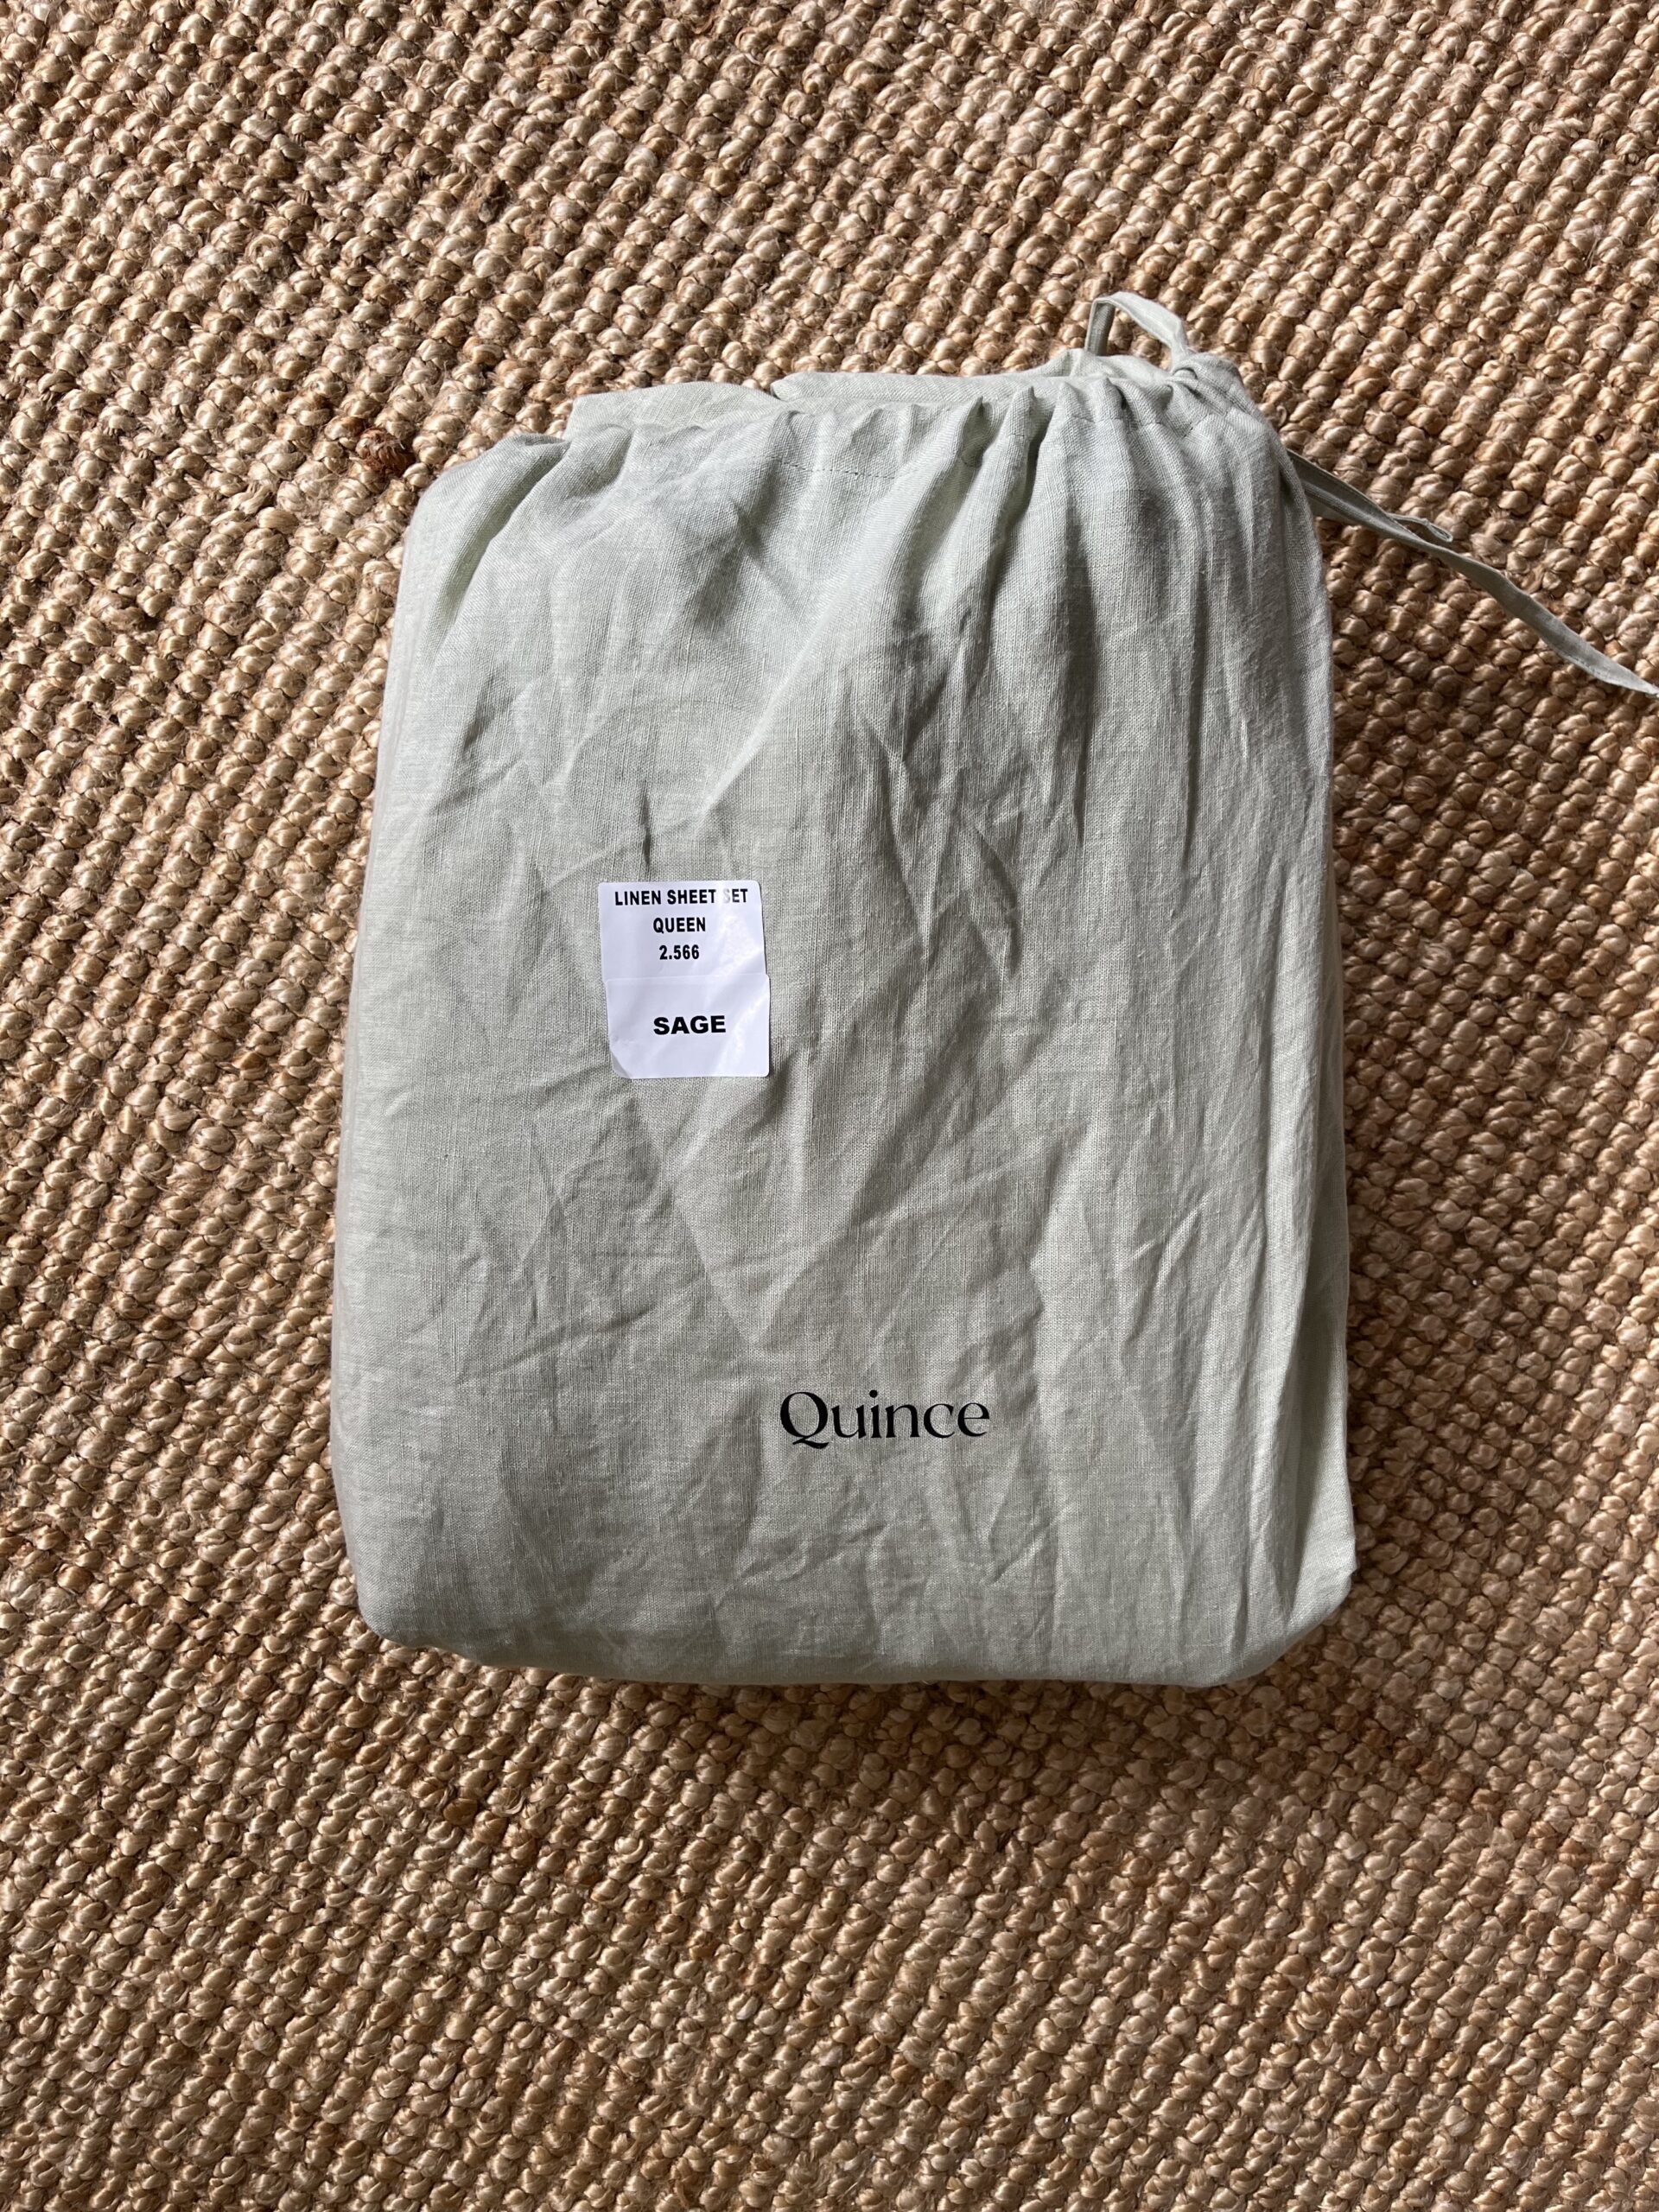 A beige fabric bag with a label reading "Linen Sheet Set - Queen - SAGA" printed in black and another label reading "Quince" is placed on a woven surface.